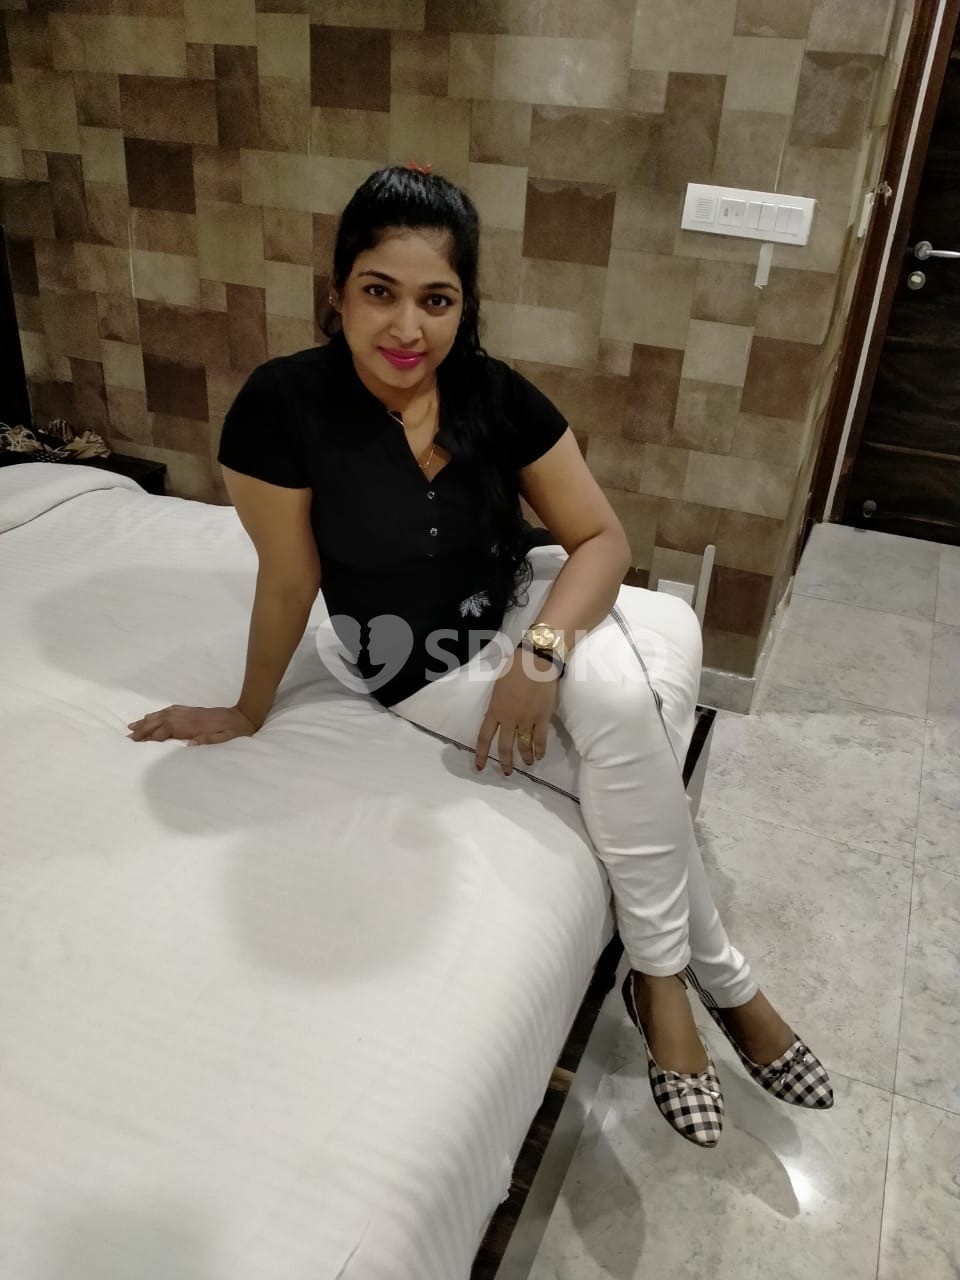 Alwarpet 🥰✅❣️.100% SAFE AND SECURE TODAY LOW PRICE UNLIMITED ENJOY HOT COLLEGE GIRL HOUSEWIFE AUNTIES AVAILABLE